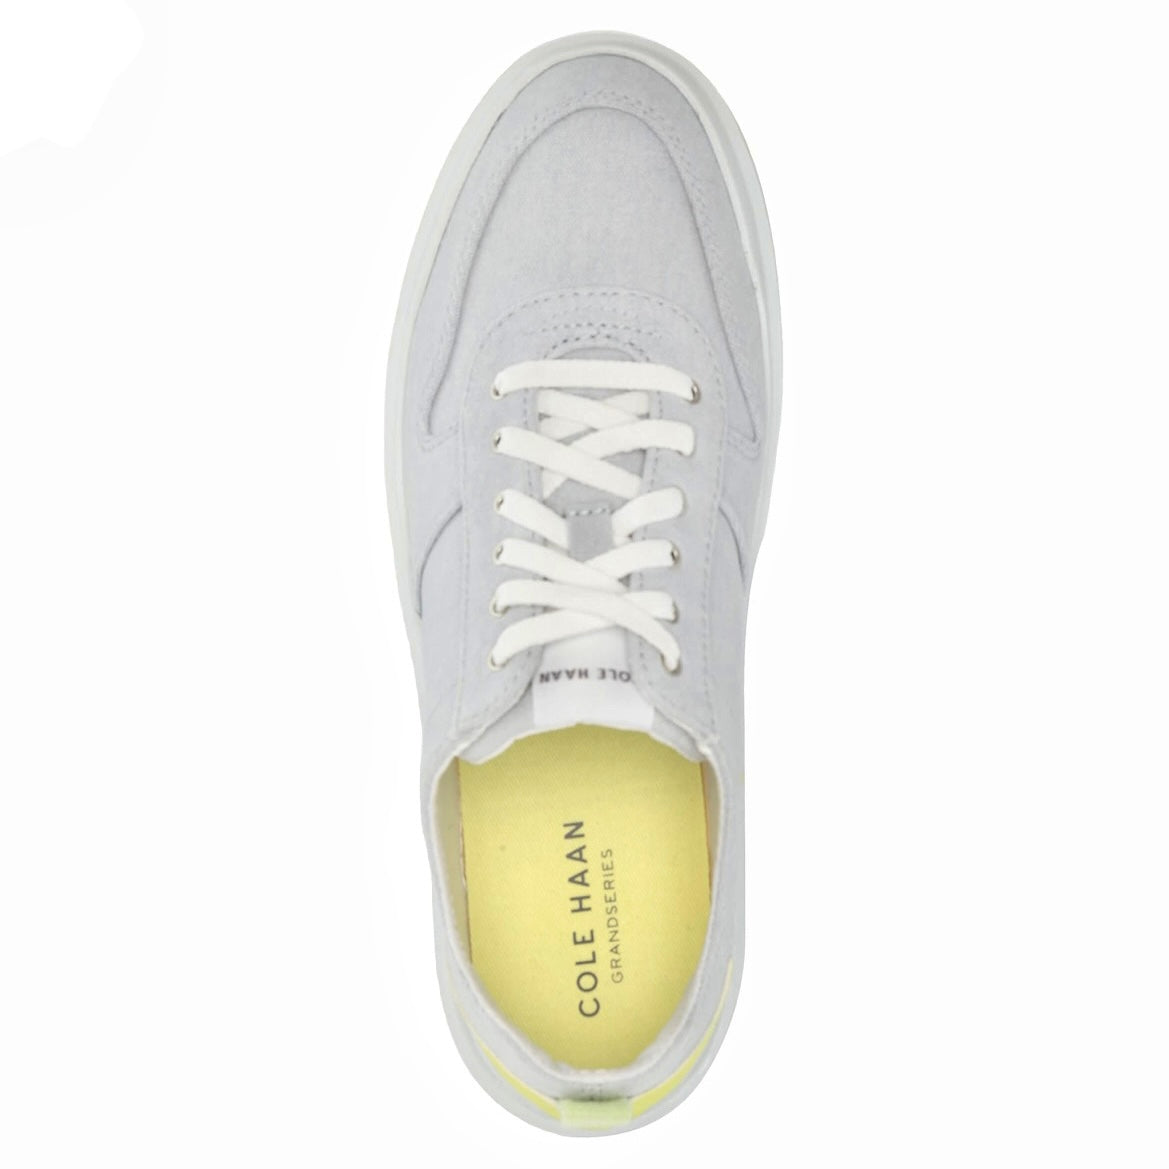 GRANDPRO Rally Canvas Court Women's Sneakers